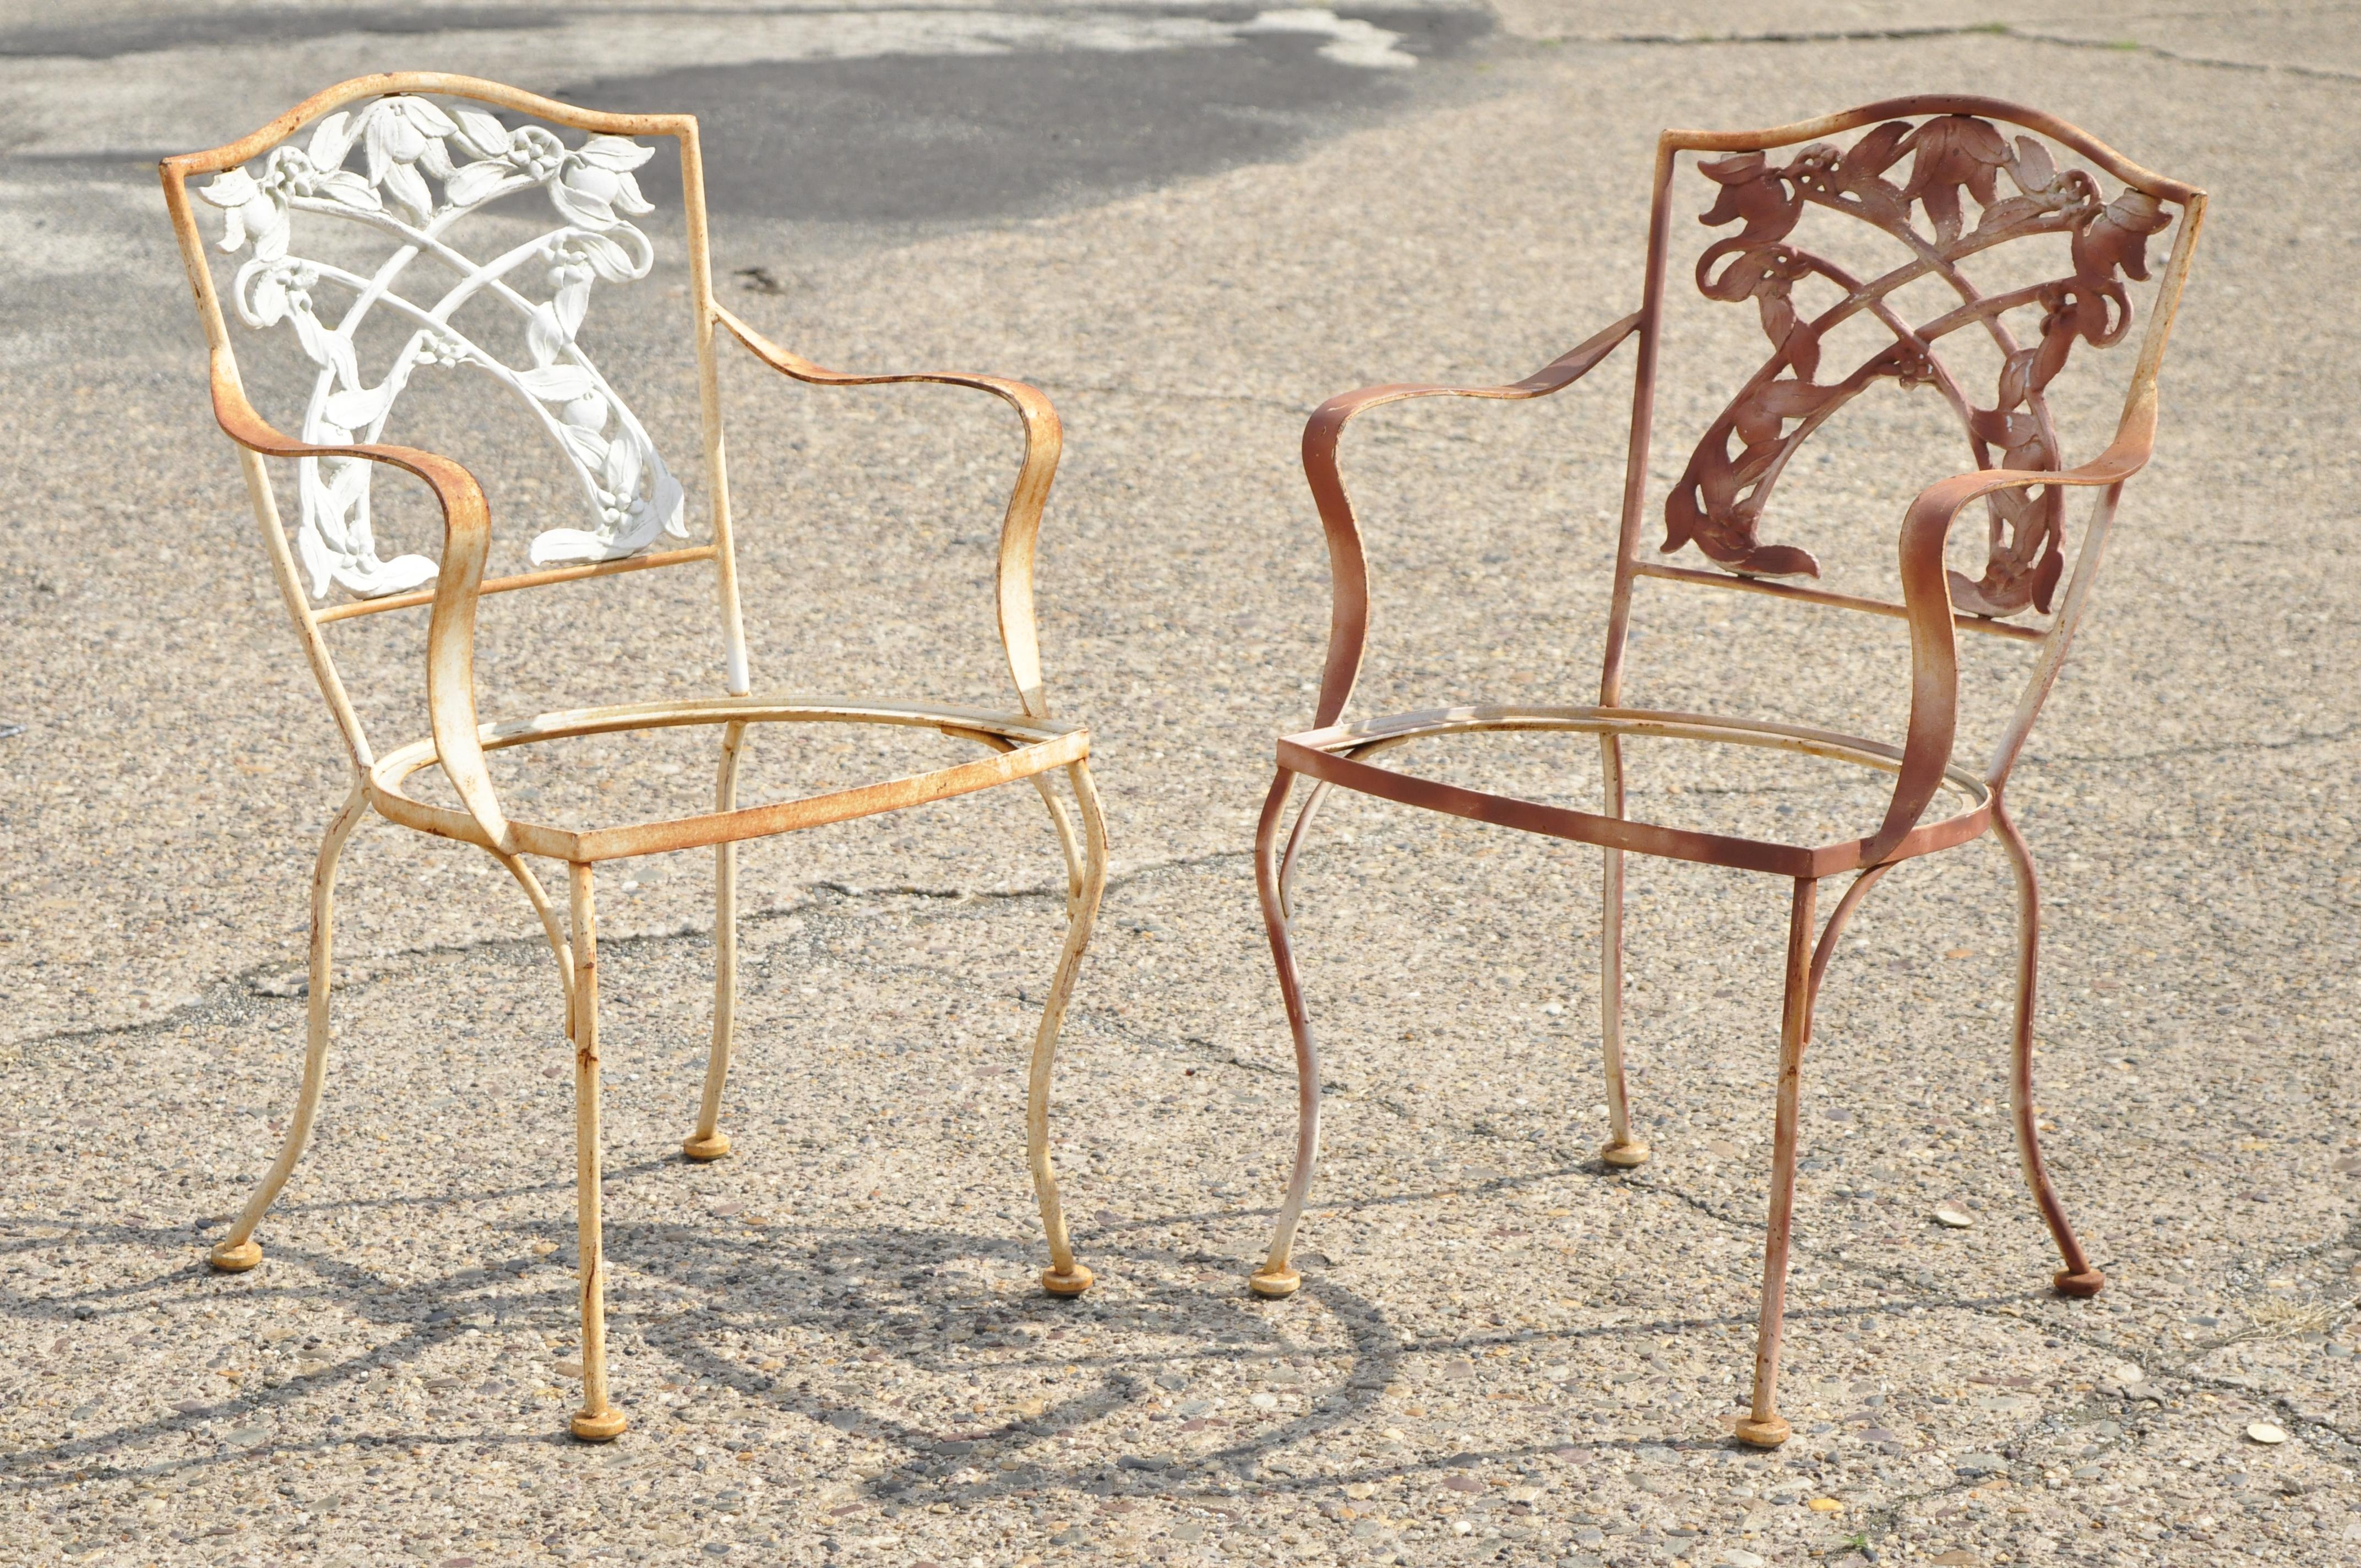 20th Century French Art Nouveau Vine Back Iron Outdoor Garden Dining Chairs, Set of 6